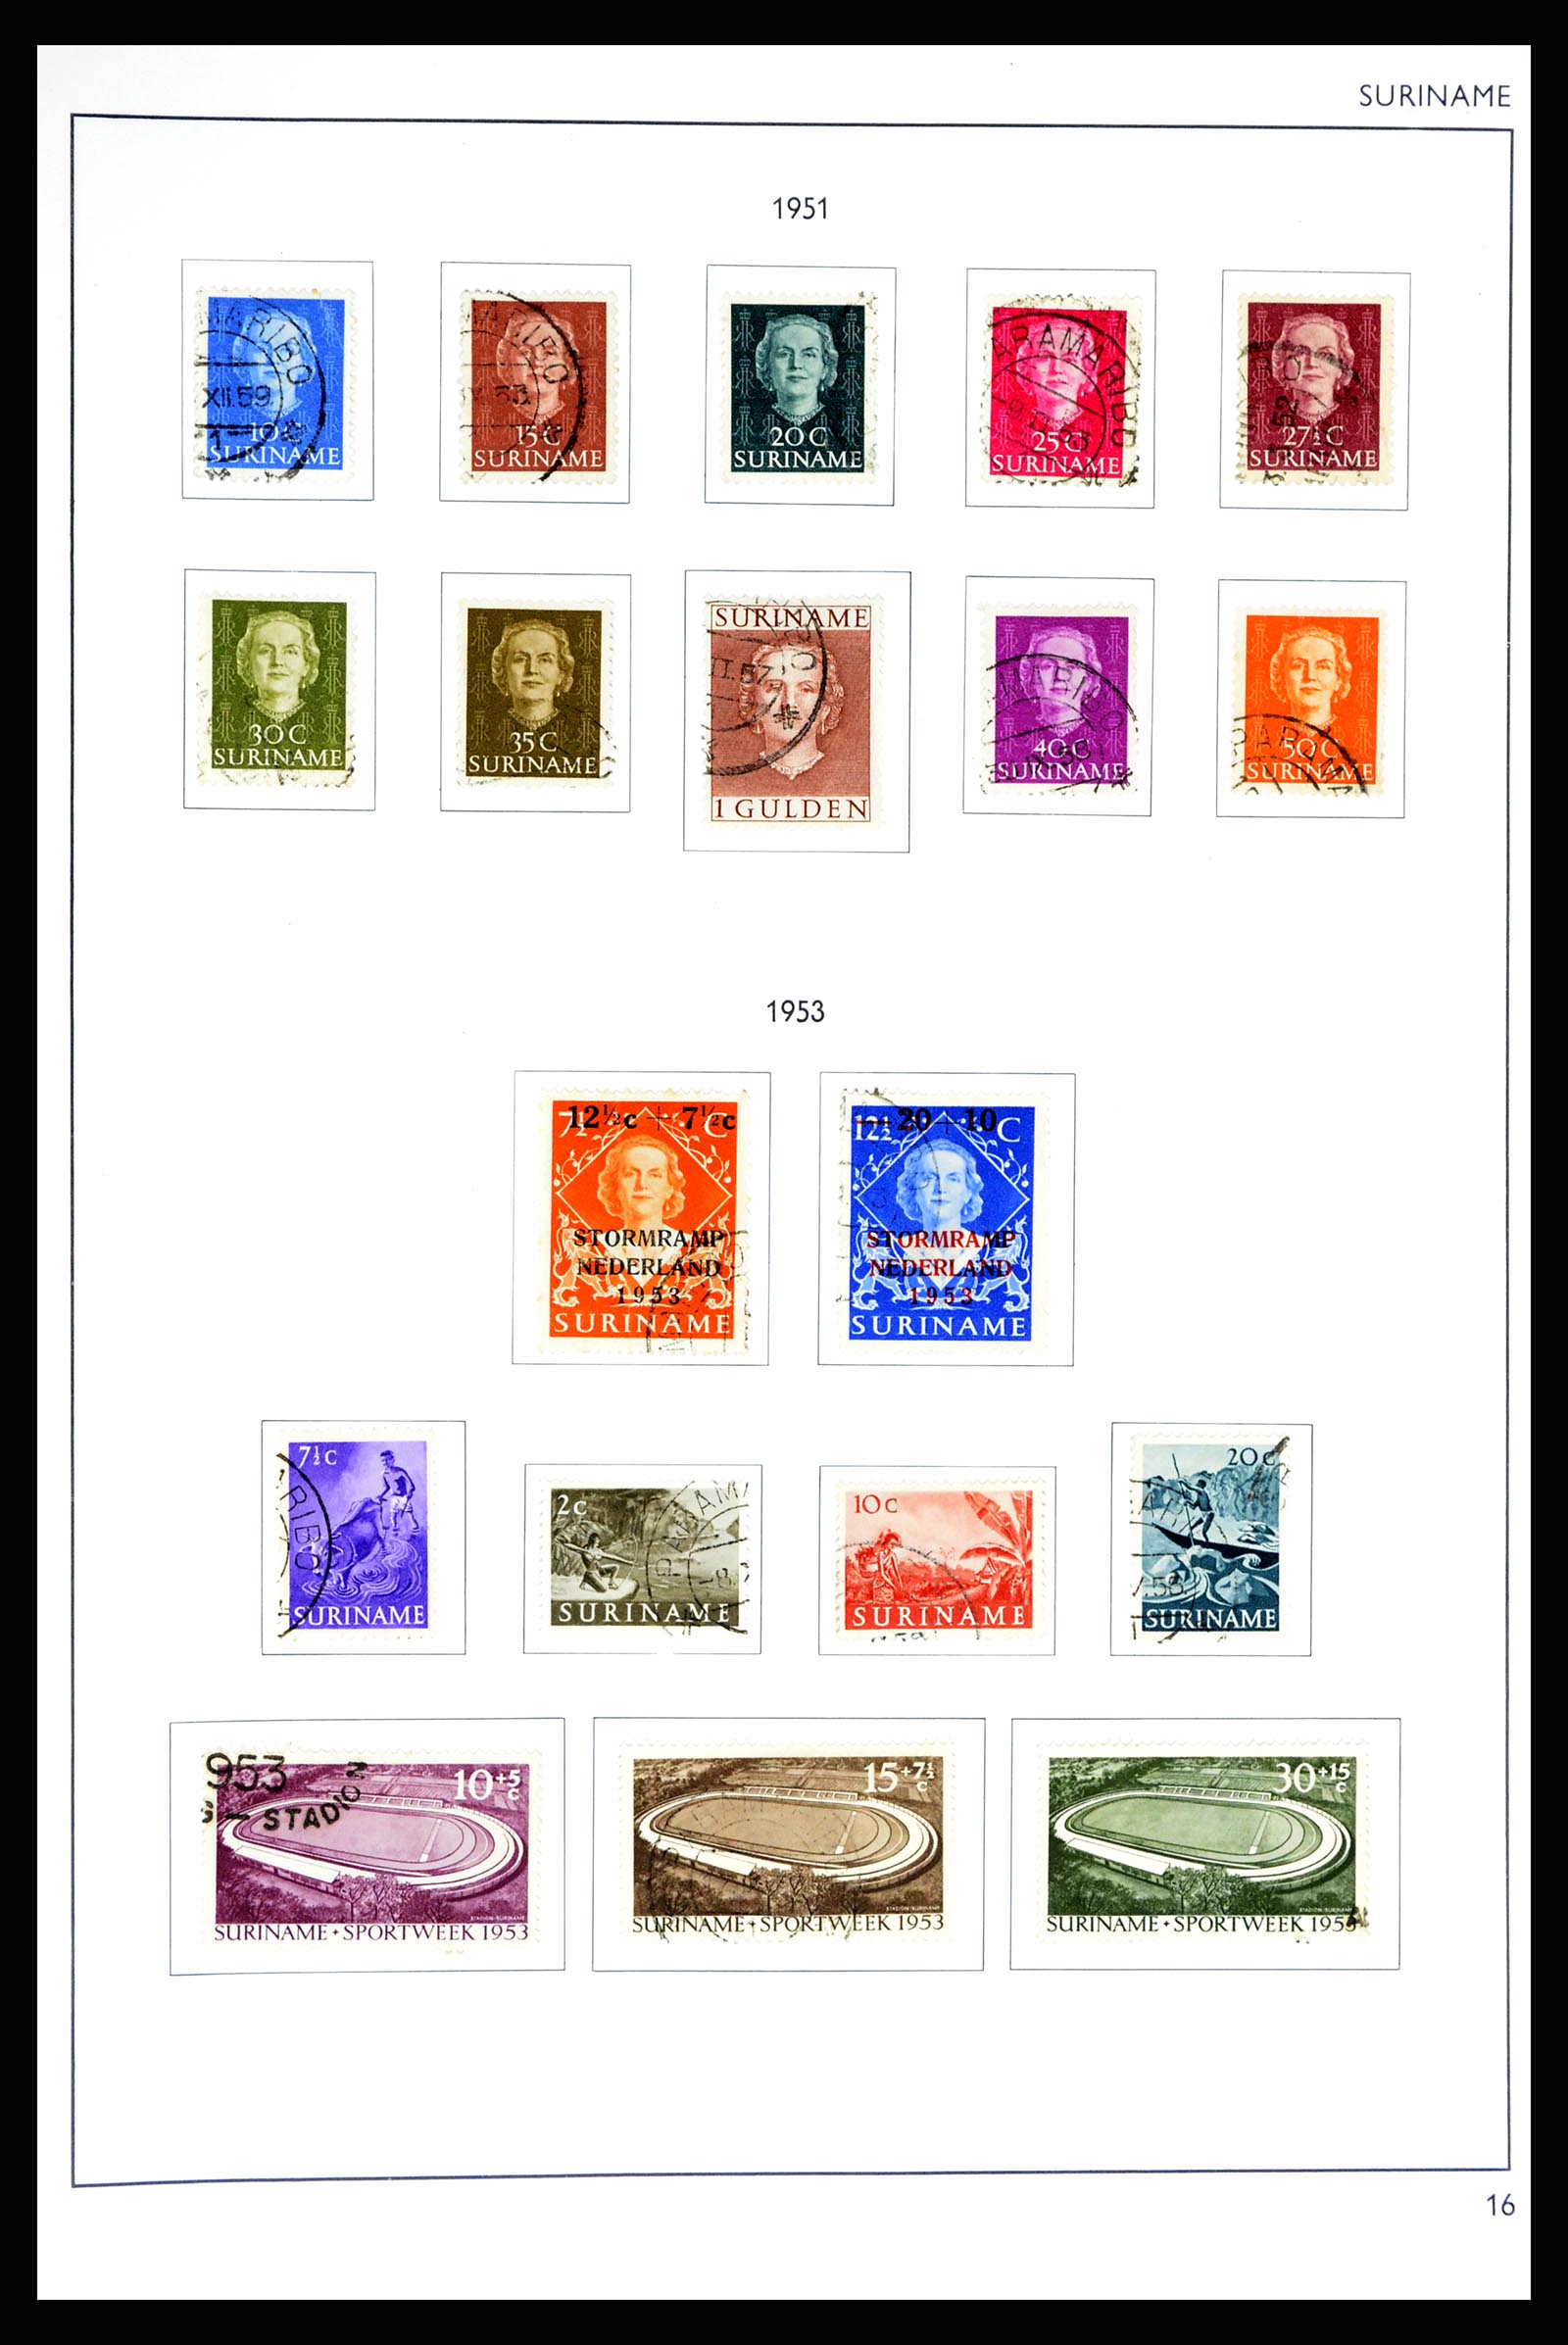 36794 016 - Stamp collection 36794 Suriname 1873-1975.